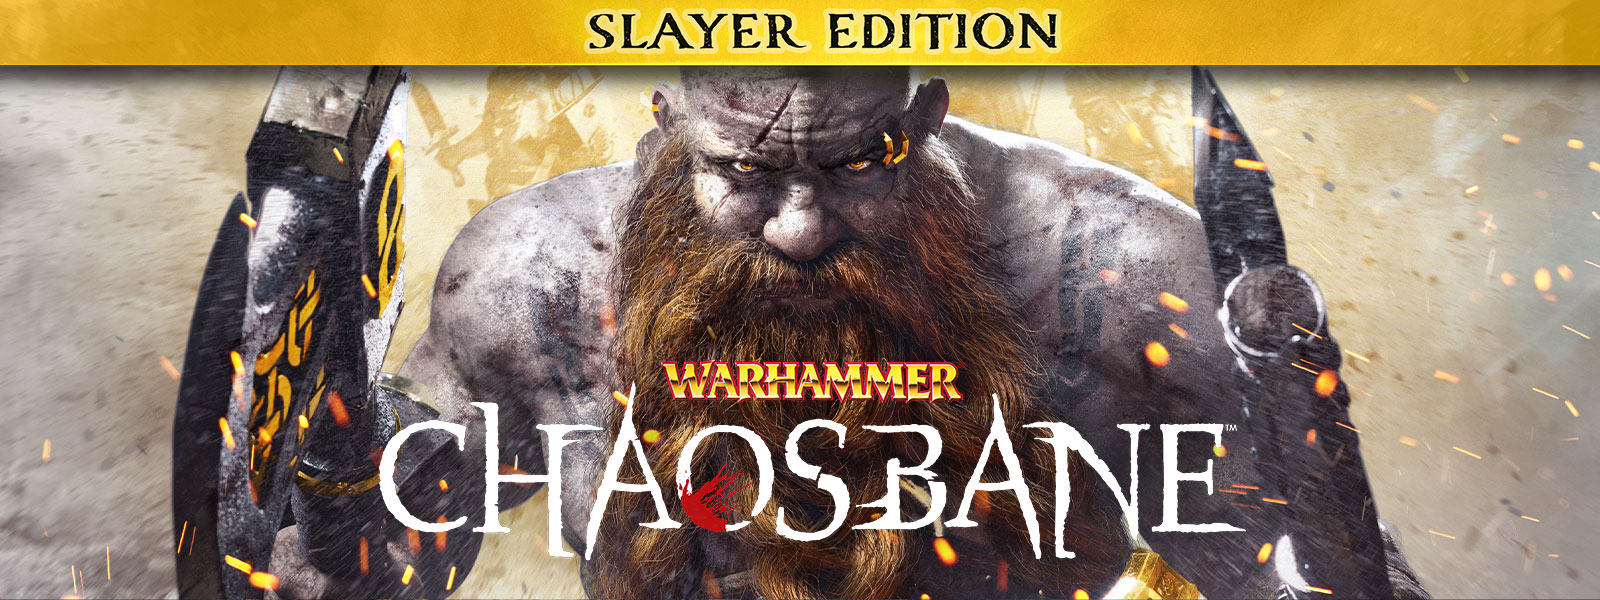 Warhammer: Chaosbane, Slayer Edition, A bearded man strides through sparks of flame, carrying an axe in each hand.